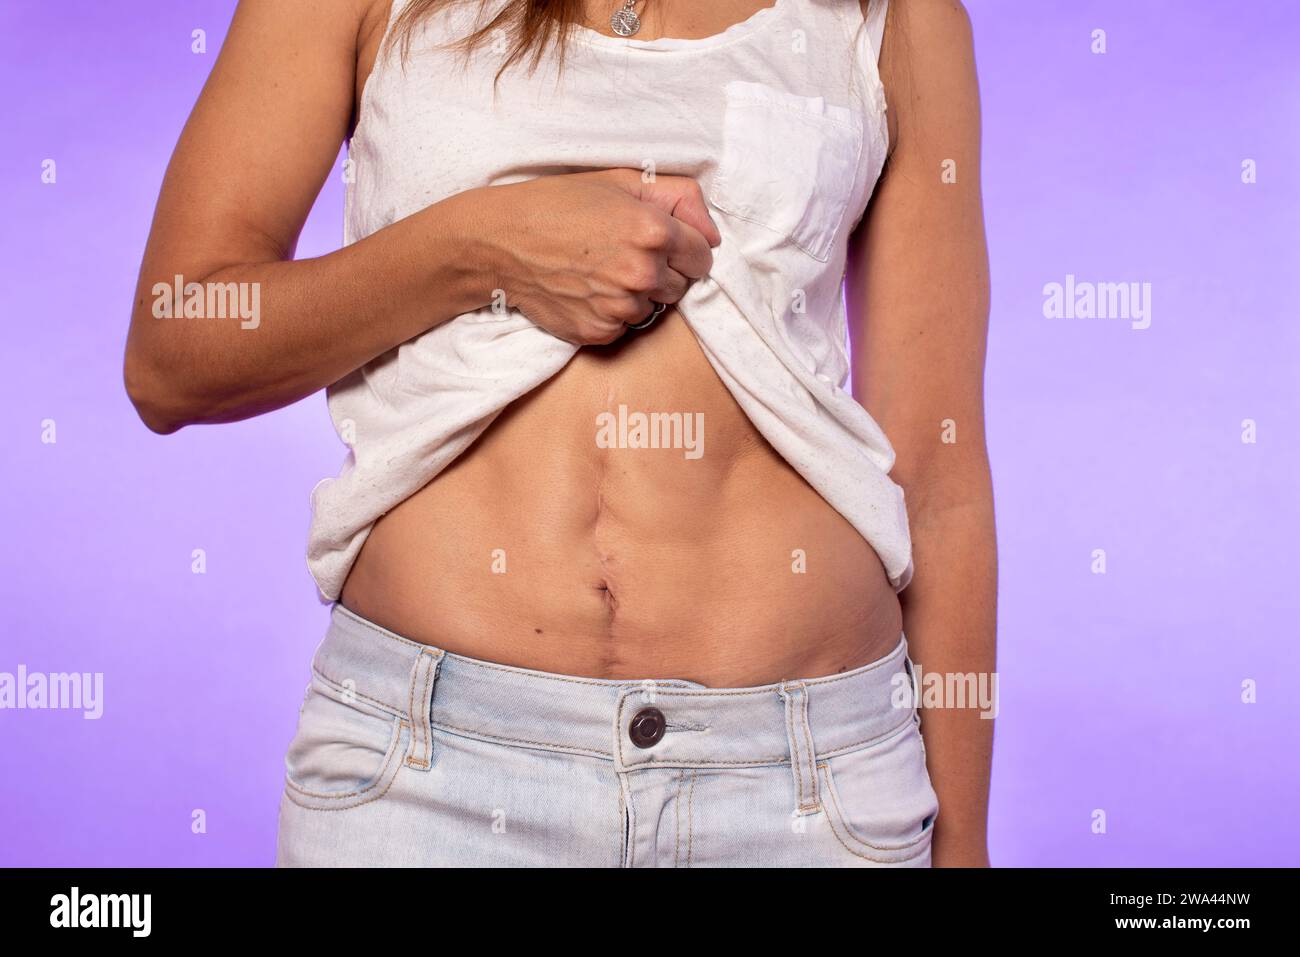 Woman showing an abdominal scar after surgery Stock Photo